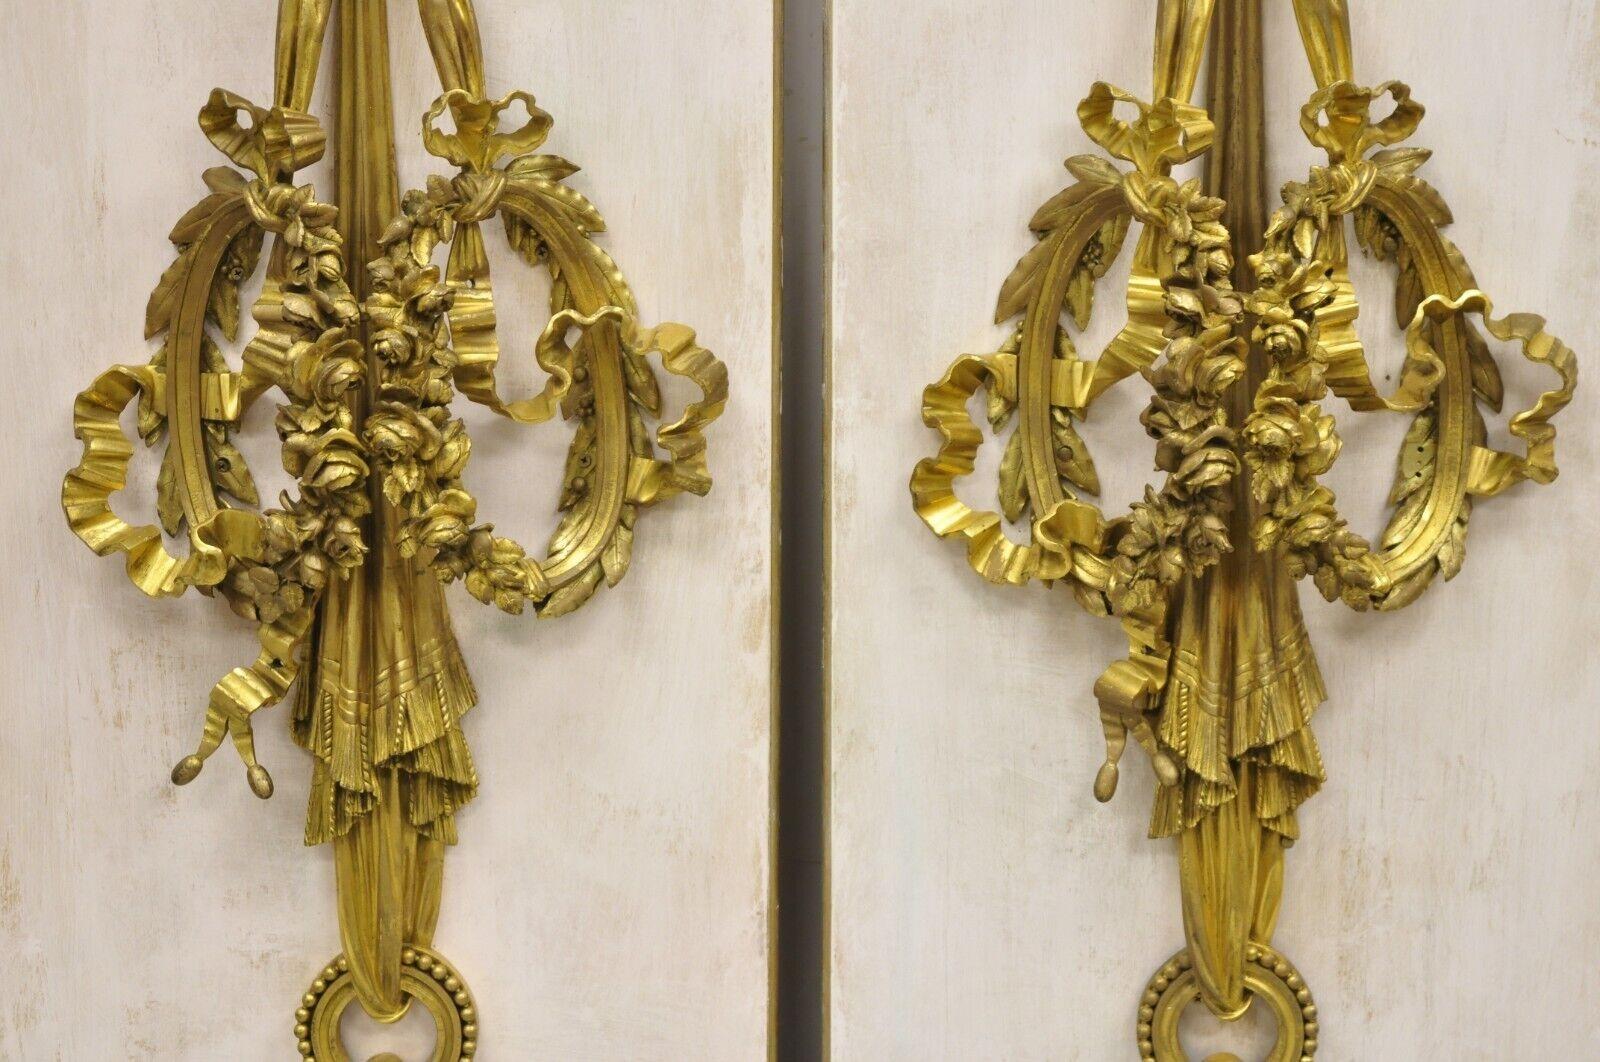 19th Century French Louis XV Gold Gilt Bronze Ribbon Drape Large Wall Plaque Sconces - a Pair For Sale